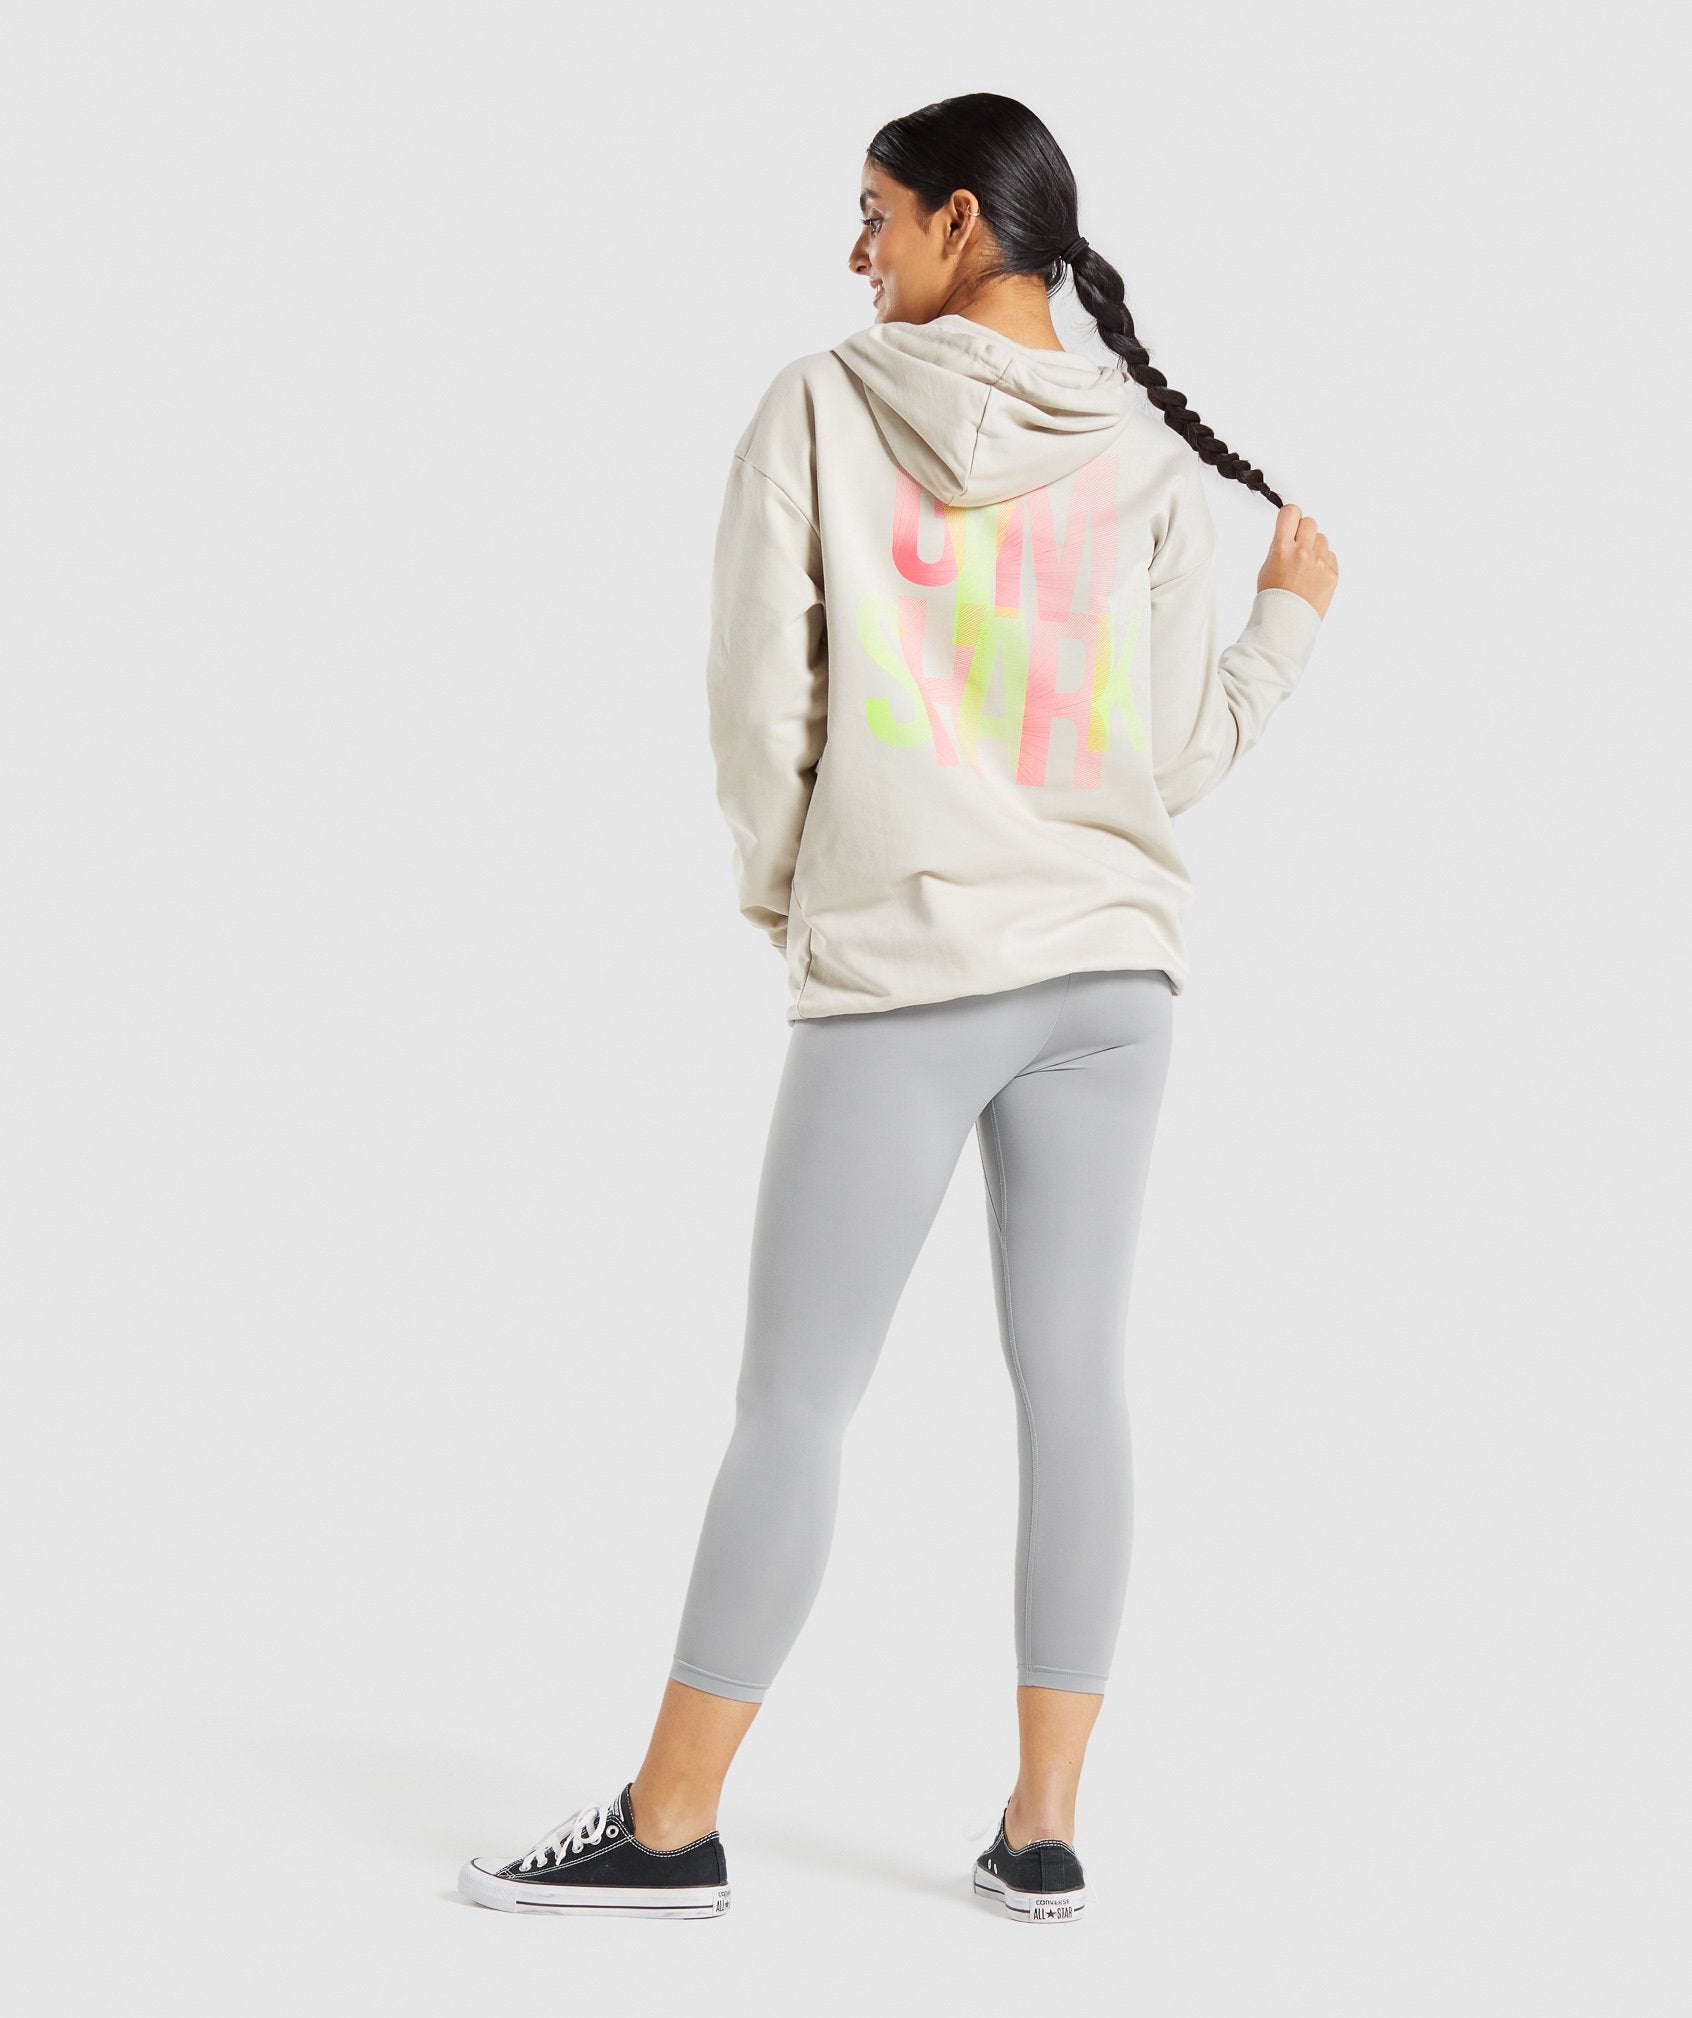 Strobe Graphic Hoodie in Grey - view 5